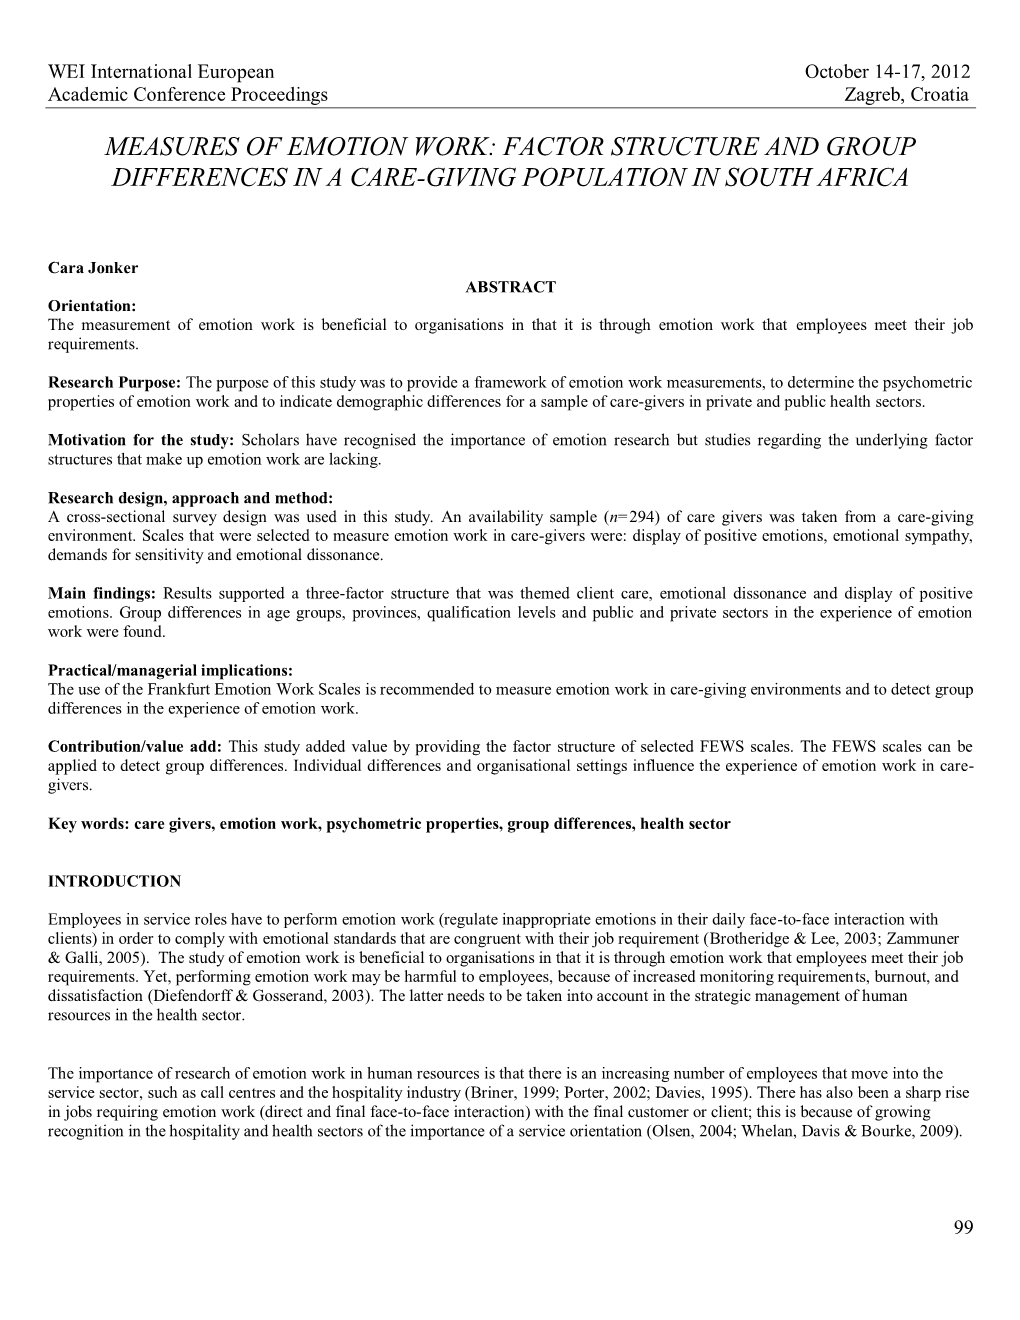 Measures of Emotion Work: Factor Structure and Group Differences in a Care-Giving Population in South Africa